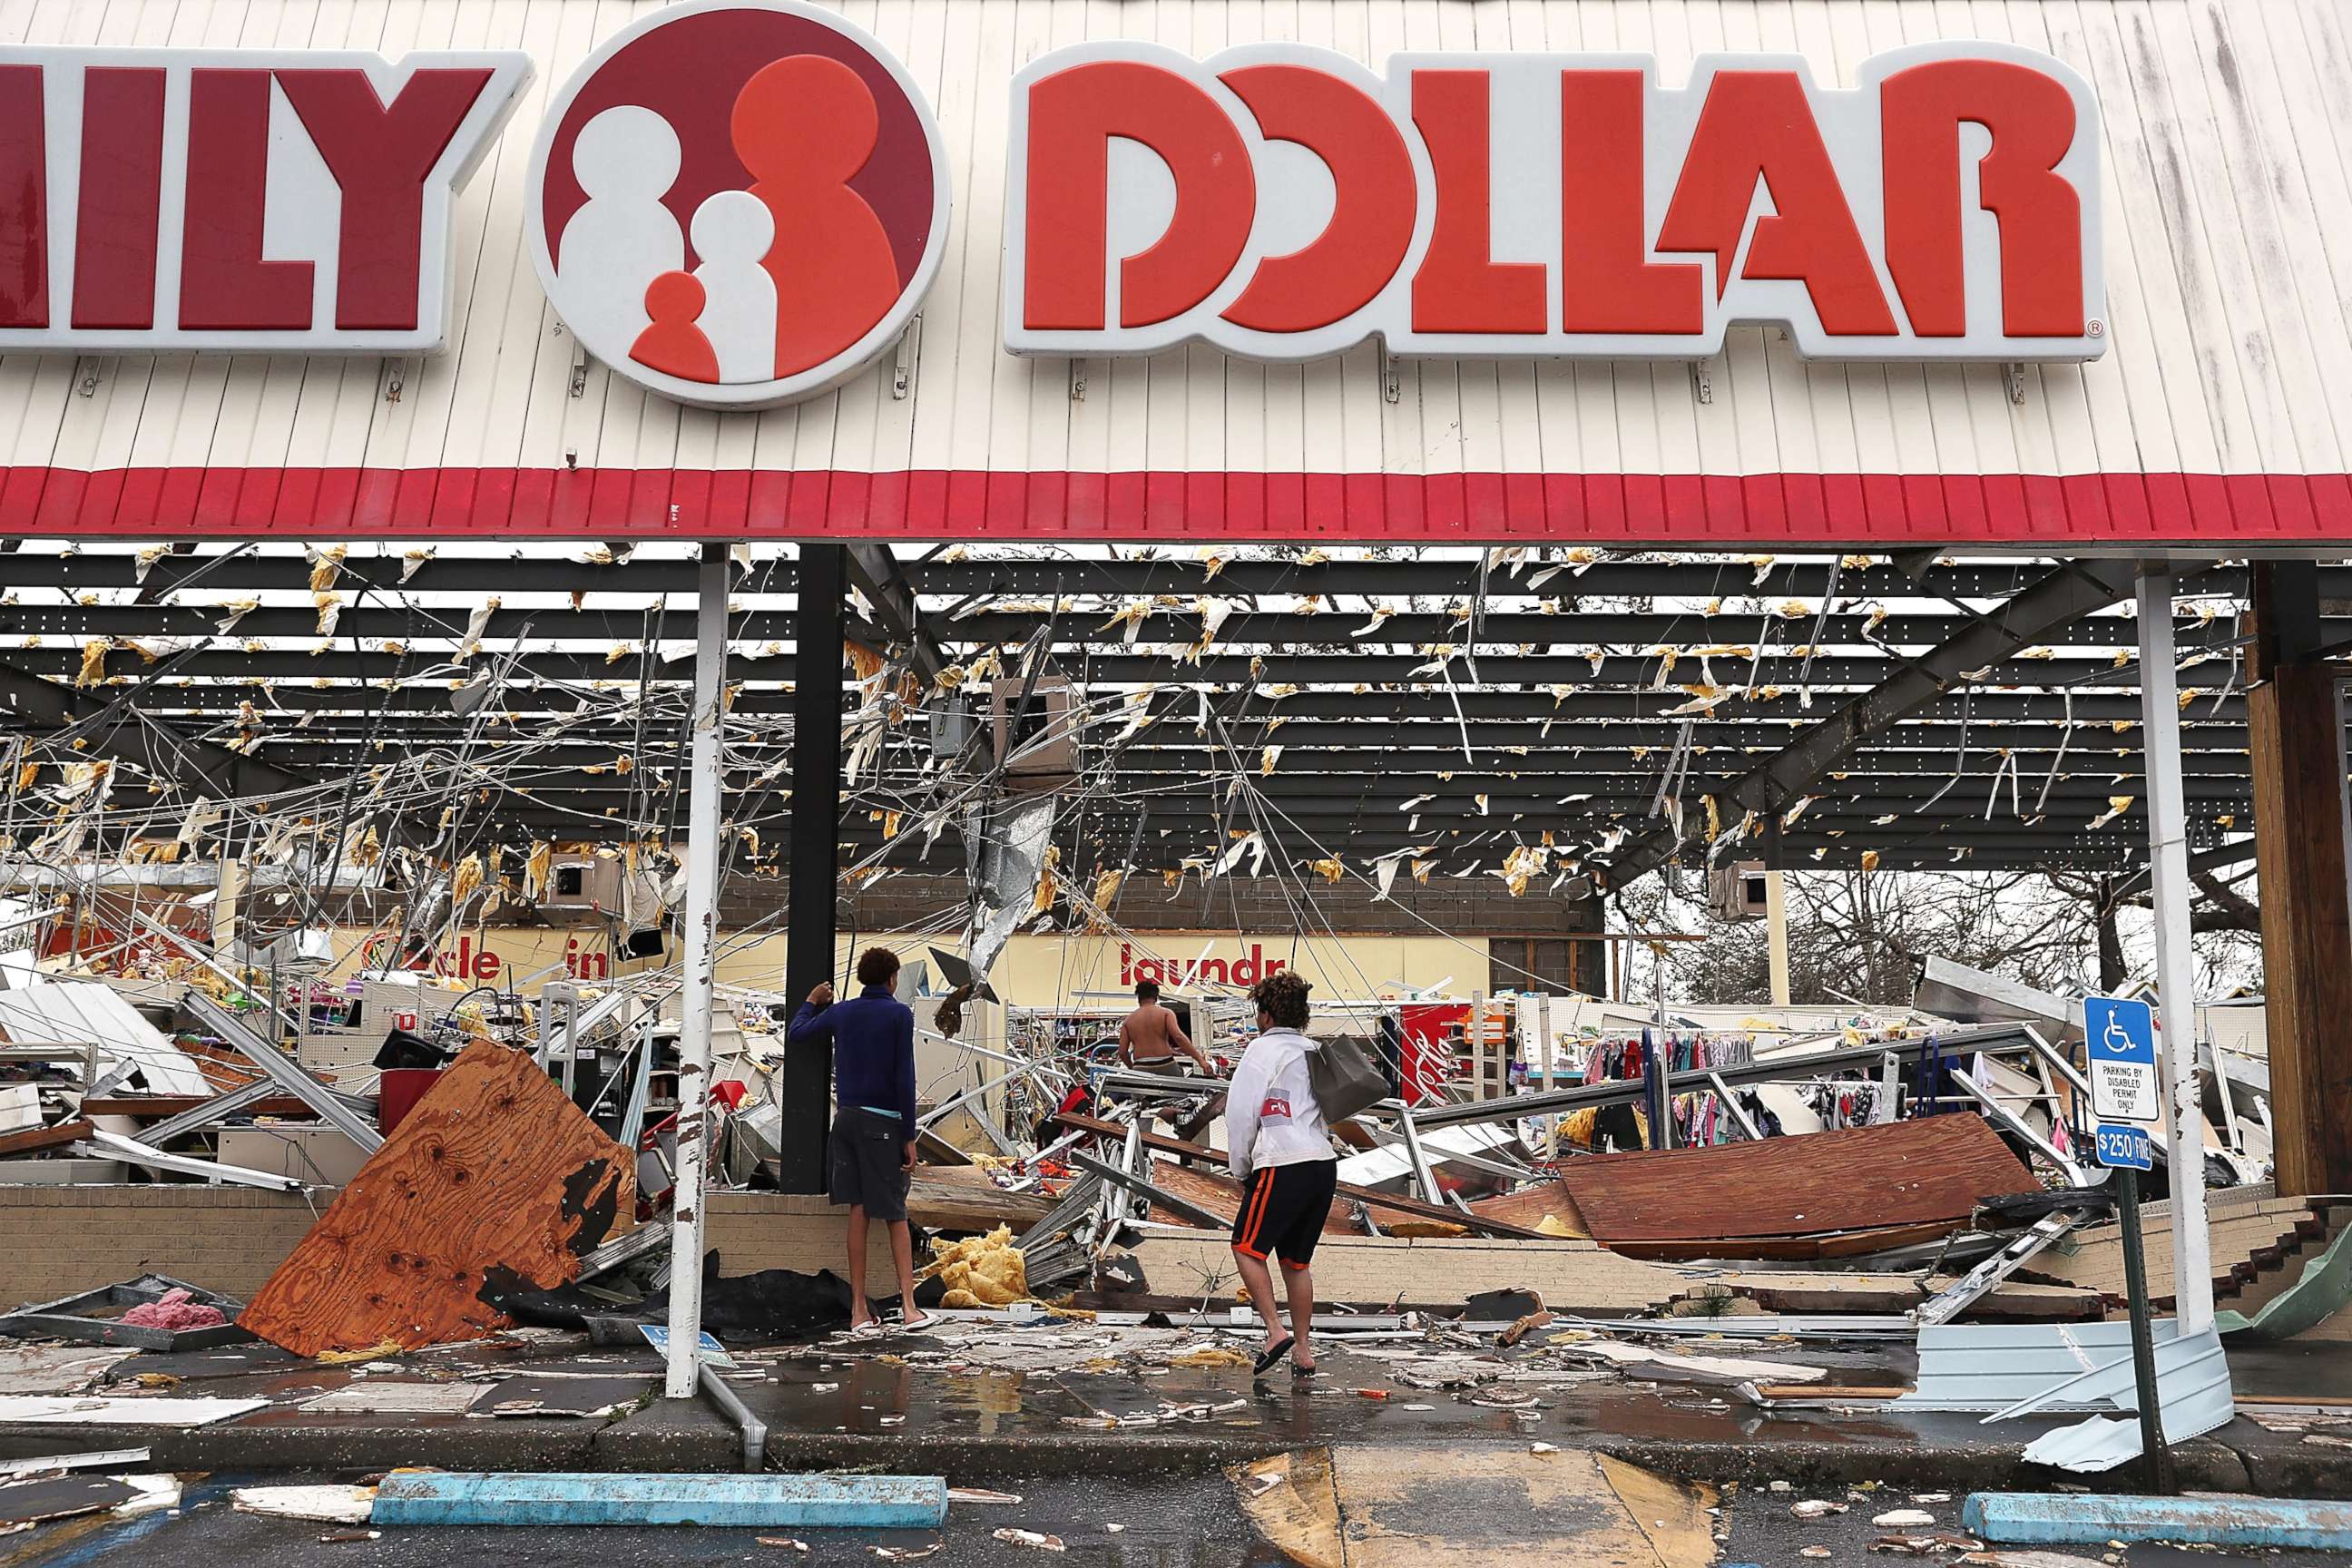 PHOTO: People look on at a damaged store after Hurricane Michael passed through on Oct. 10, 2018, in Panama City, Fla.